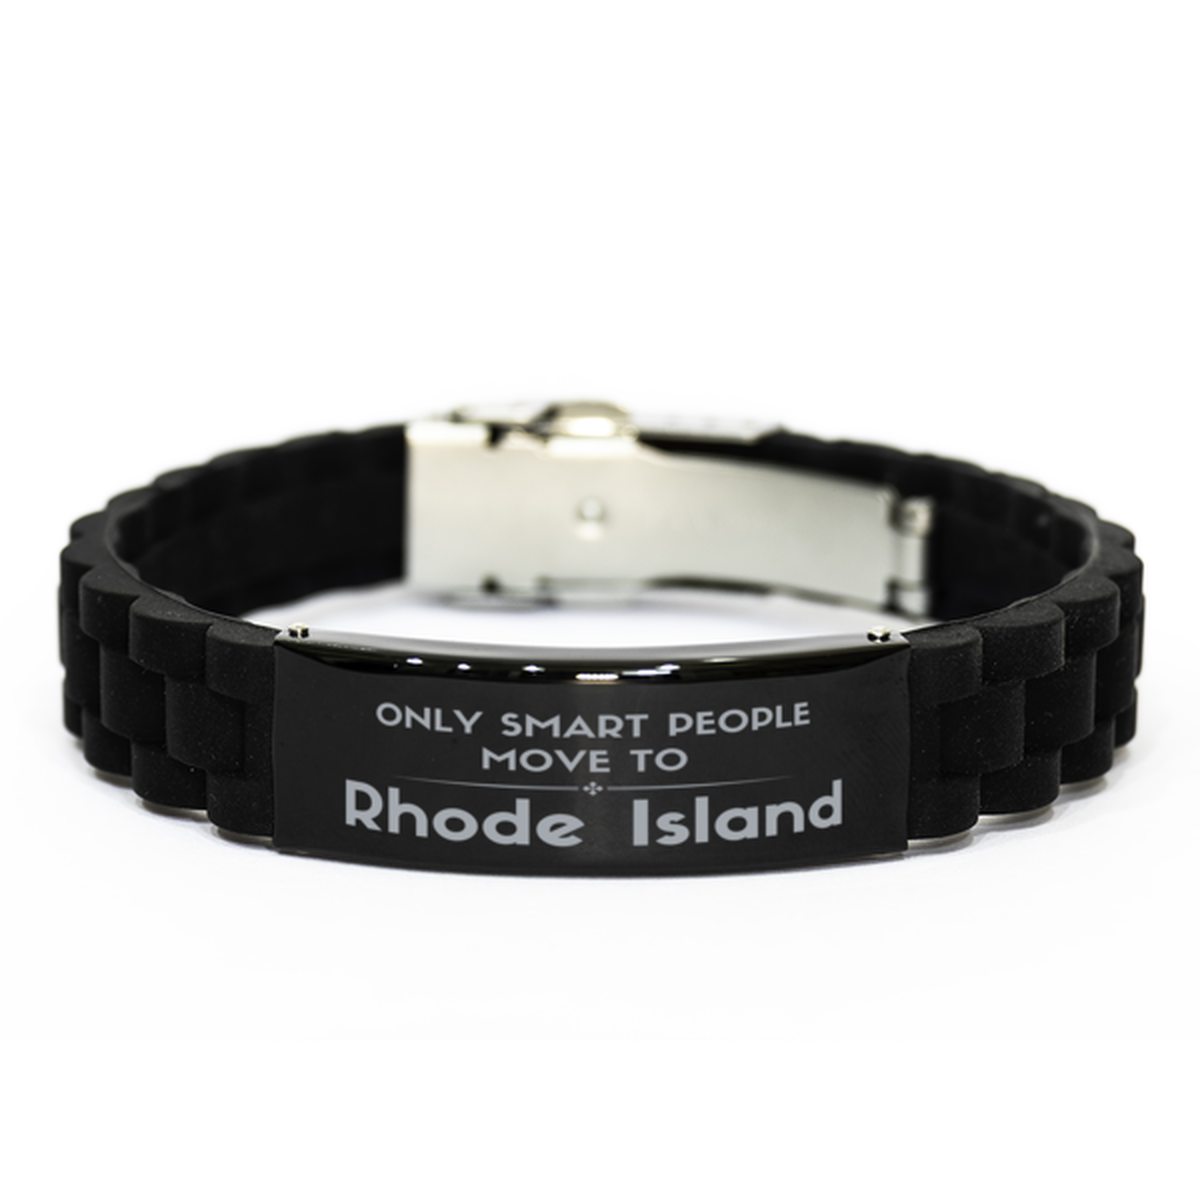 Only smart people move to Rhode Island Black Glidelock Clasp Bracelet, Gag Gifts For Rhode Island, Move to Rhode Island Gifts for Friends Coworker Funny Saying Quote